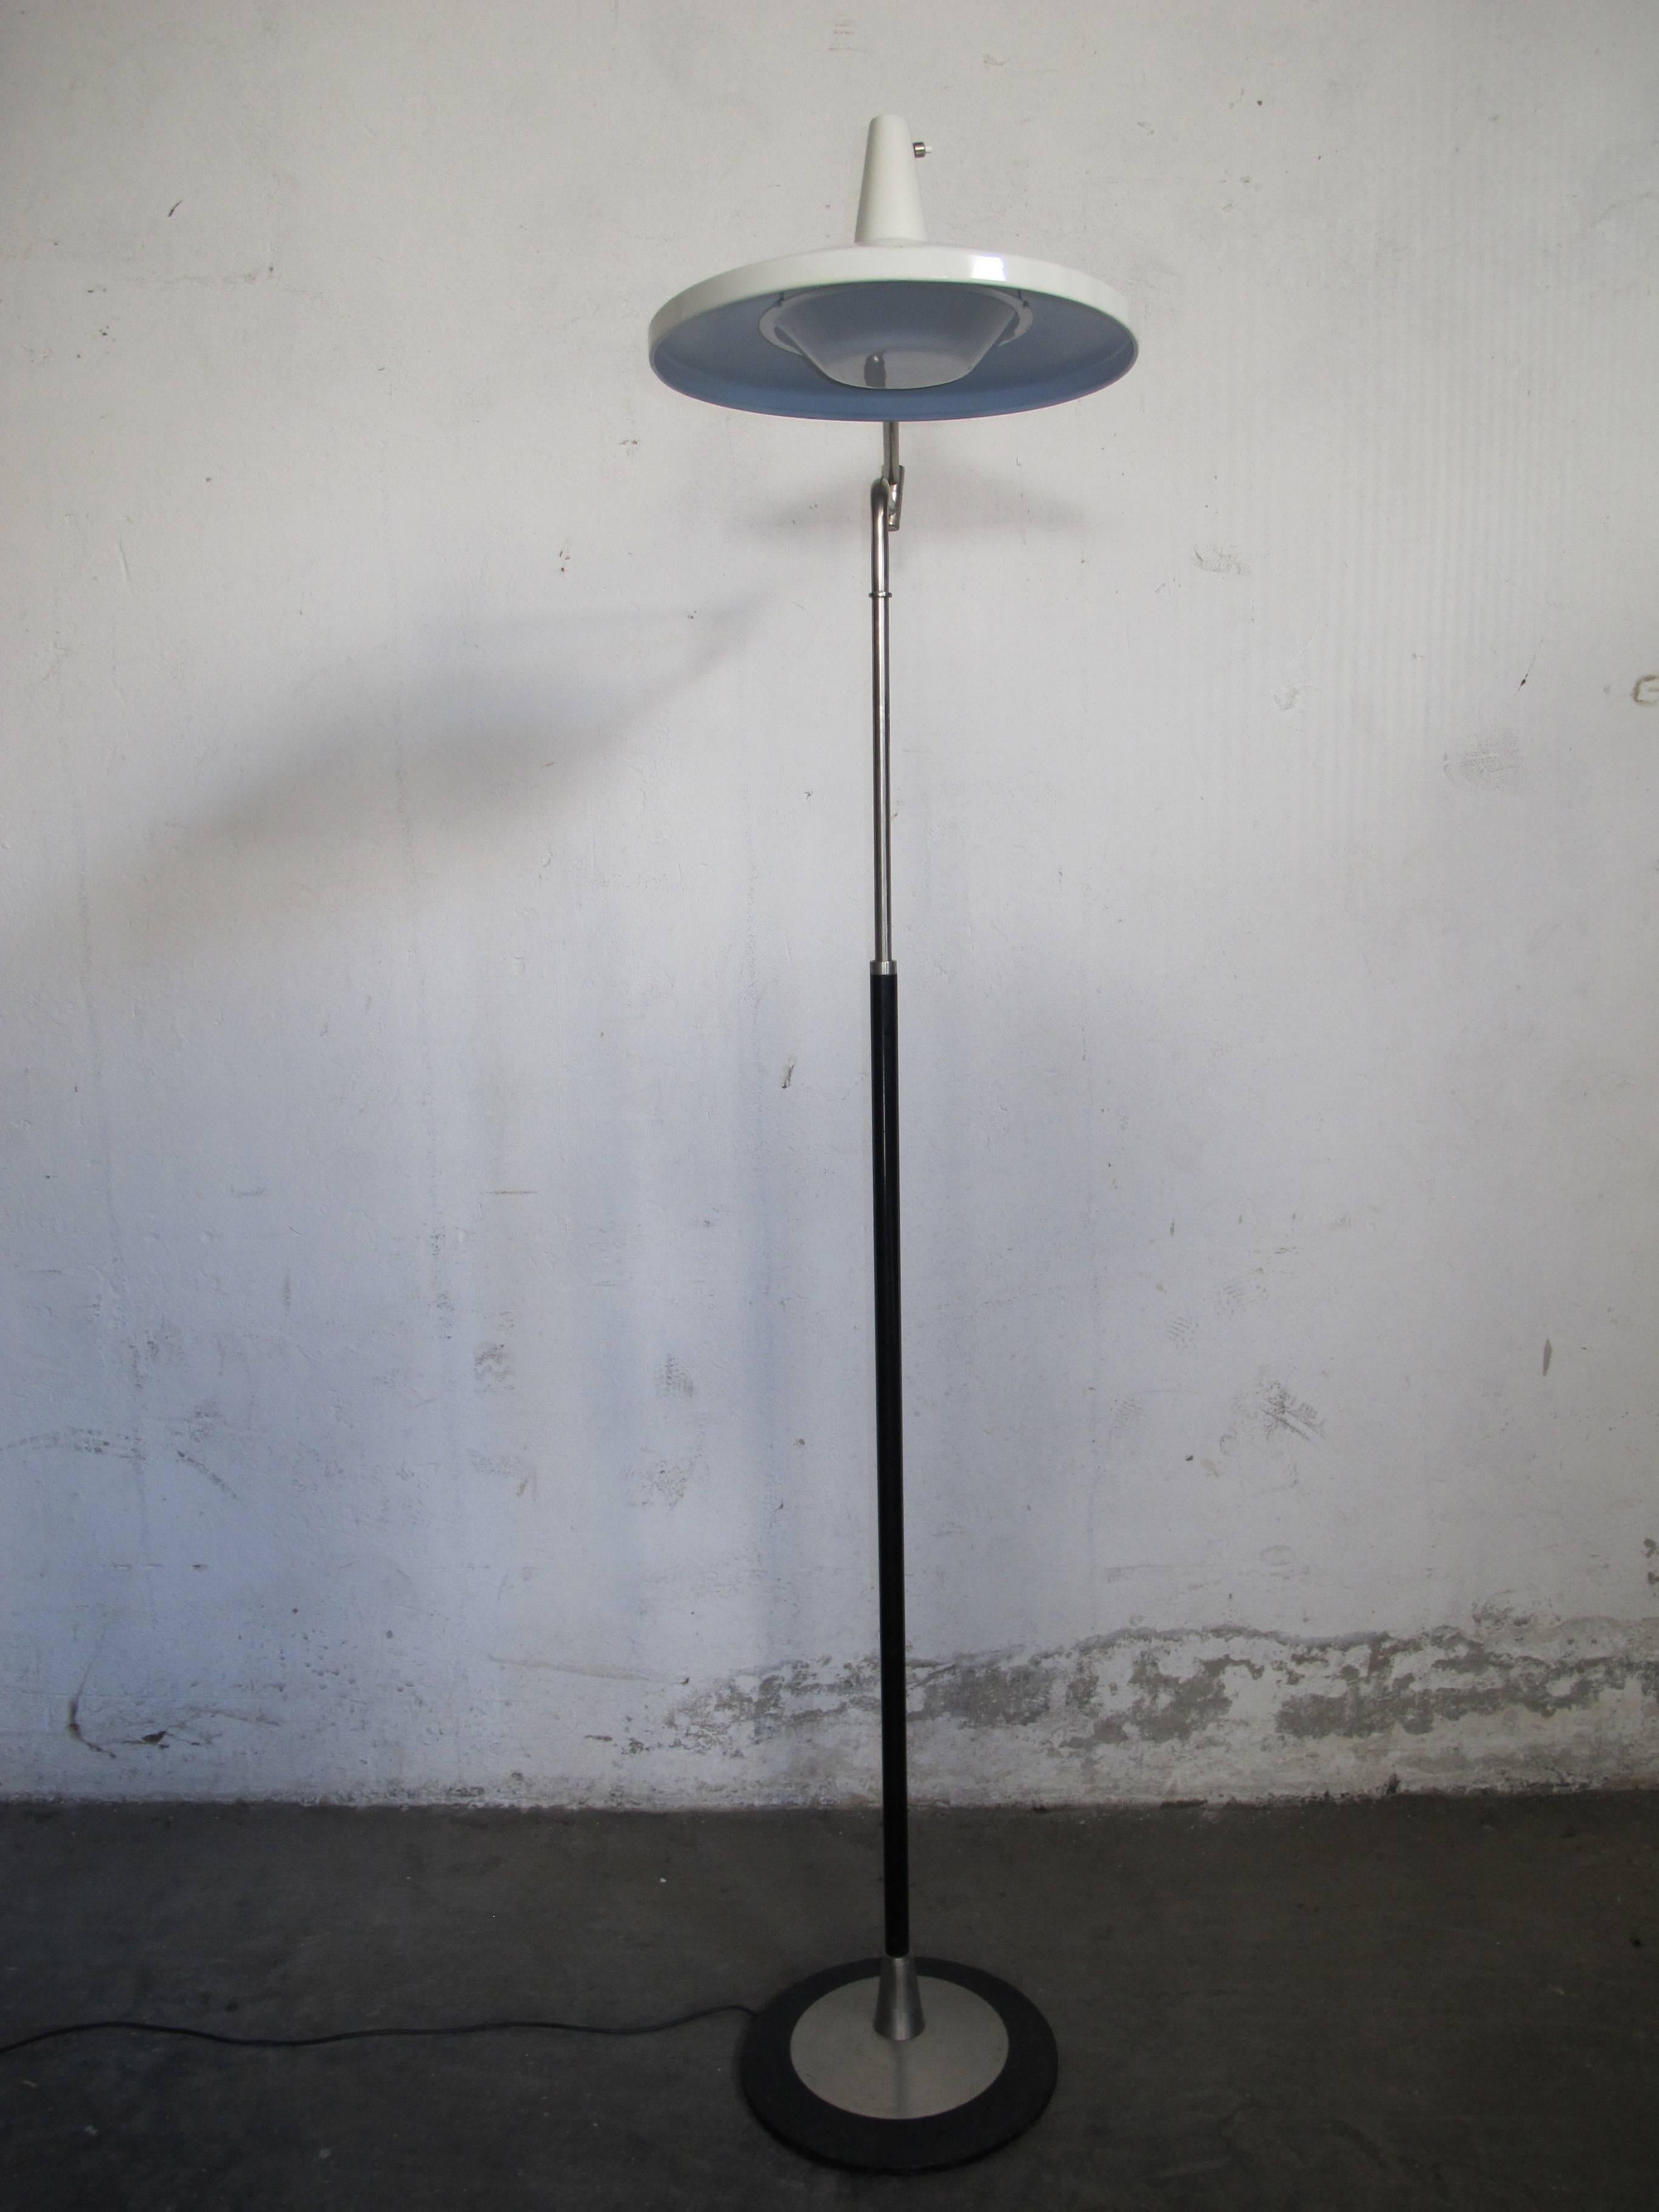 Floor lamp, design Stilnovo 1950.
Brushed metal frame, light diffuser painted metal, the lamp is articulated, you can raise or lower, minimum height 160cm,
maximum height of 190 cm.